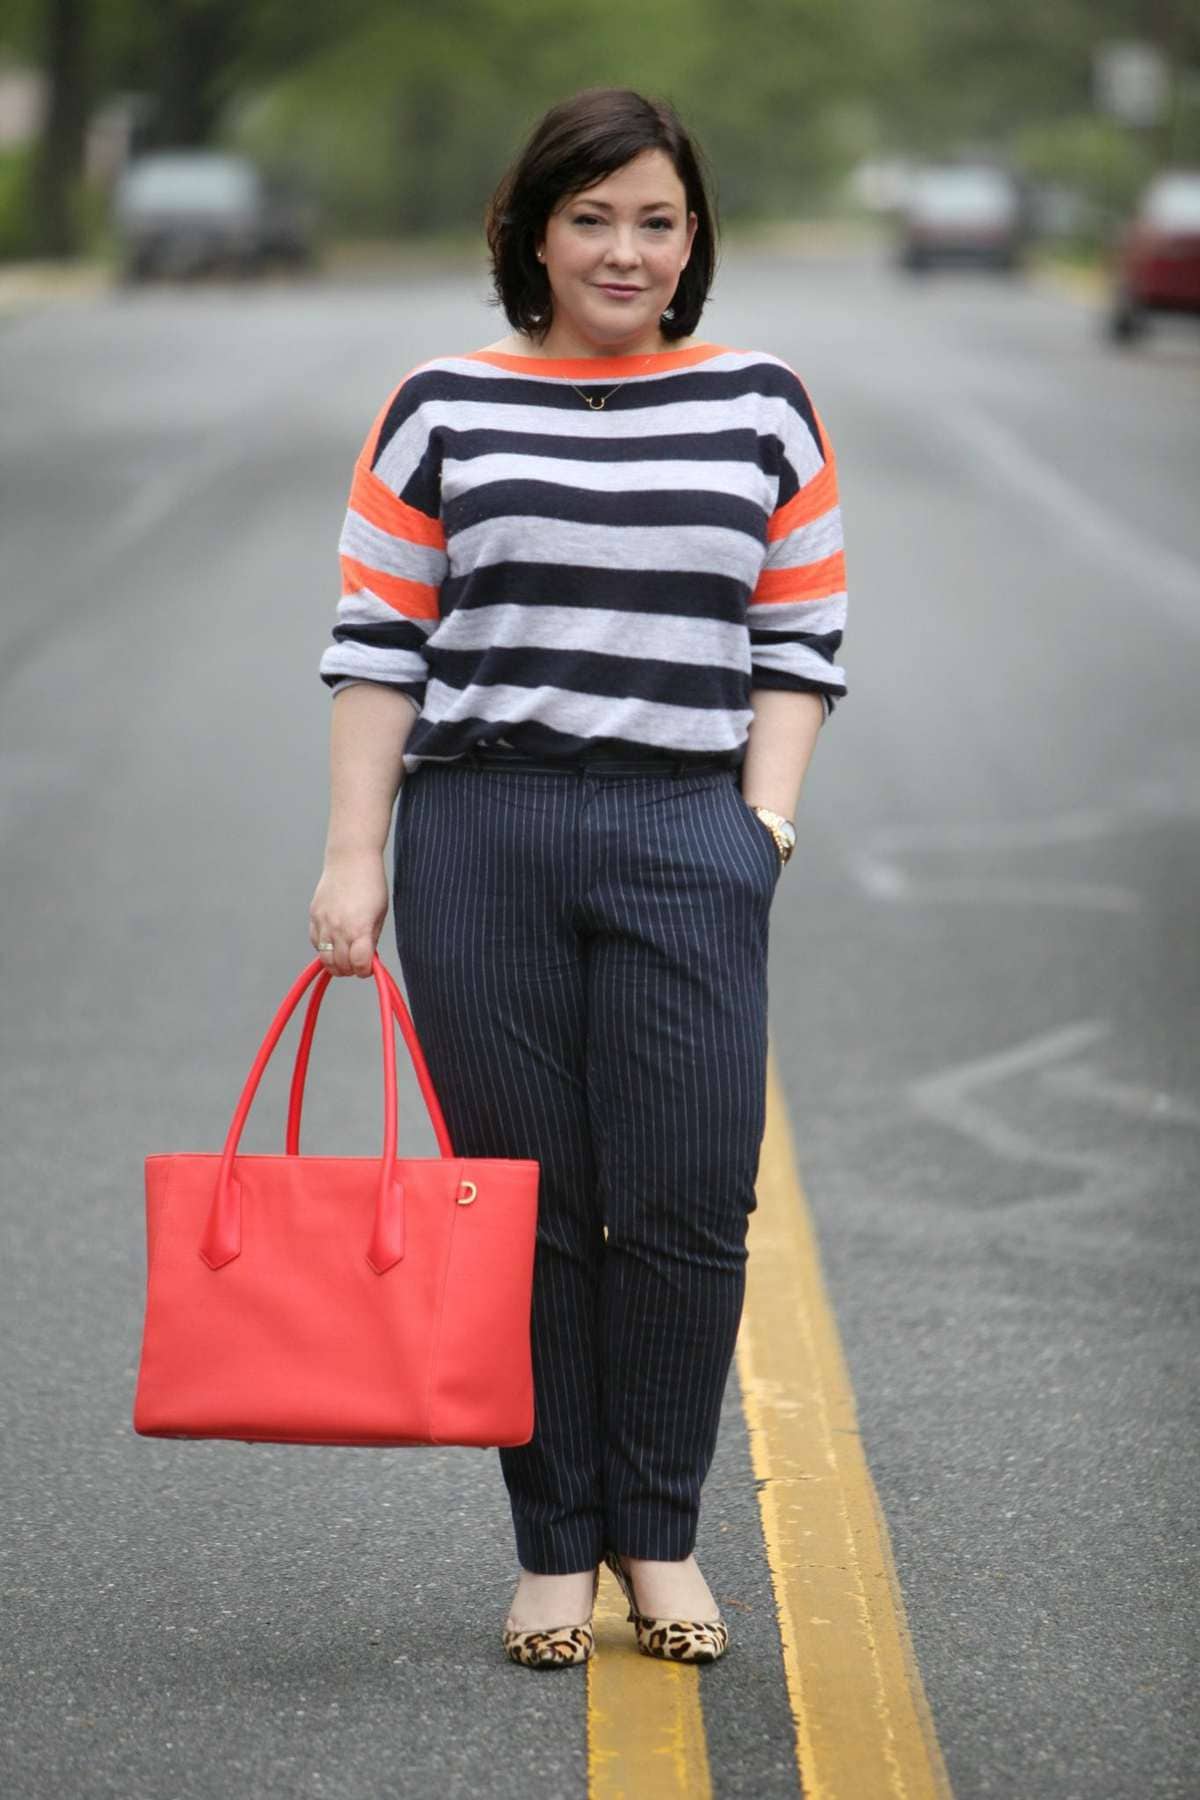 Wardrobe Oxygen, over 40 curvy fashion blogger featuring a J. Crew cashmere sweater, Banana Republic pants, and a Dagne Dover 15" tote